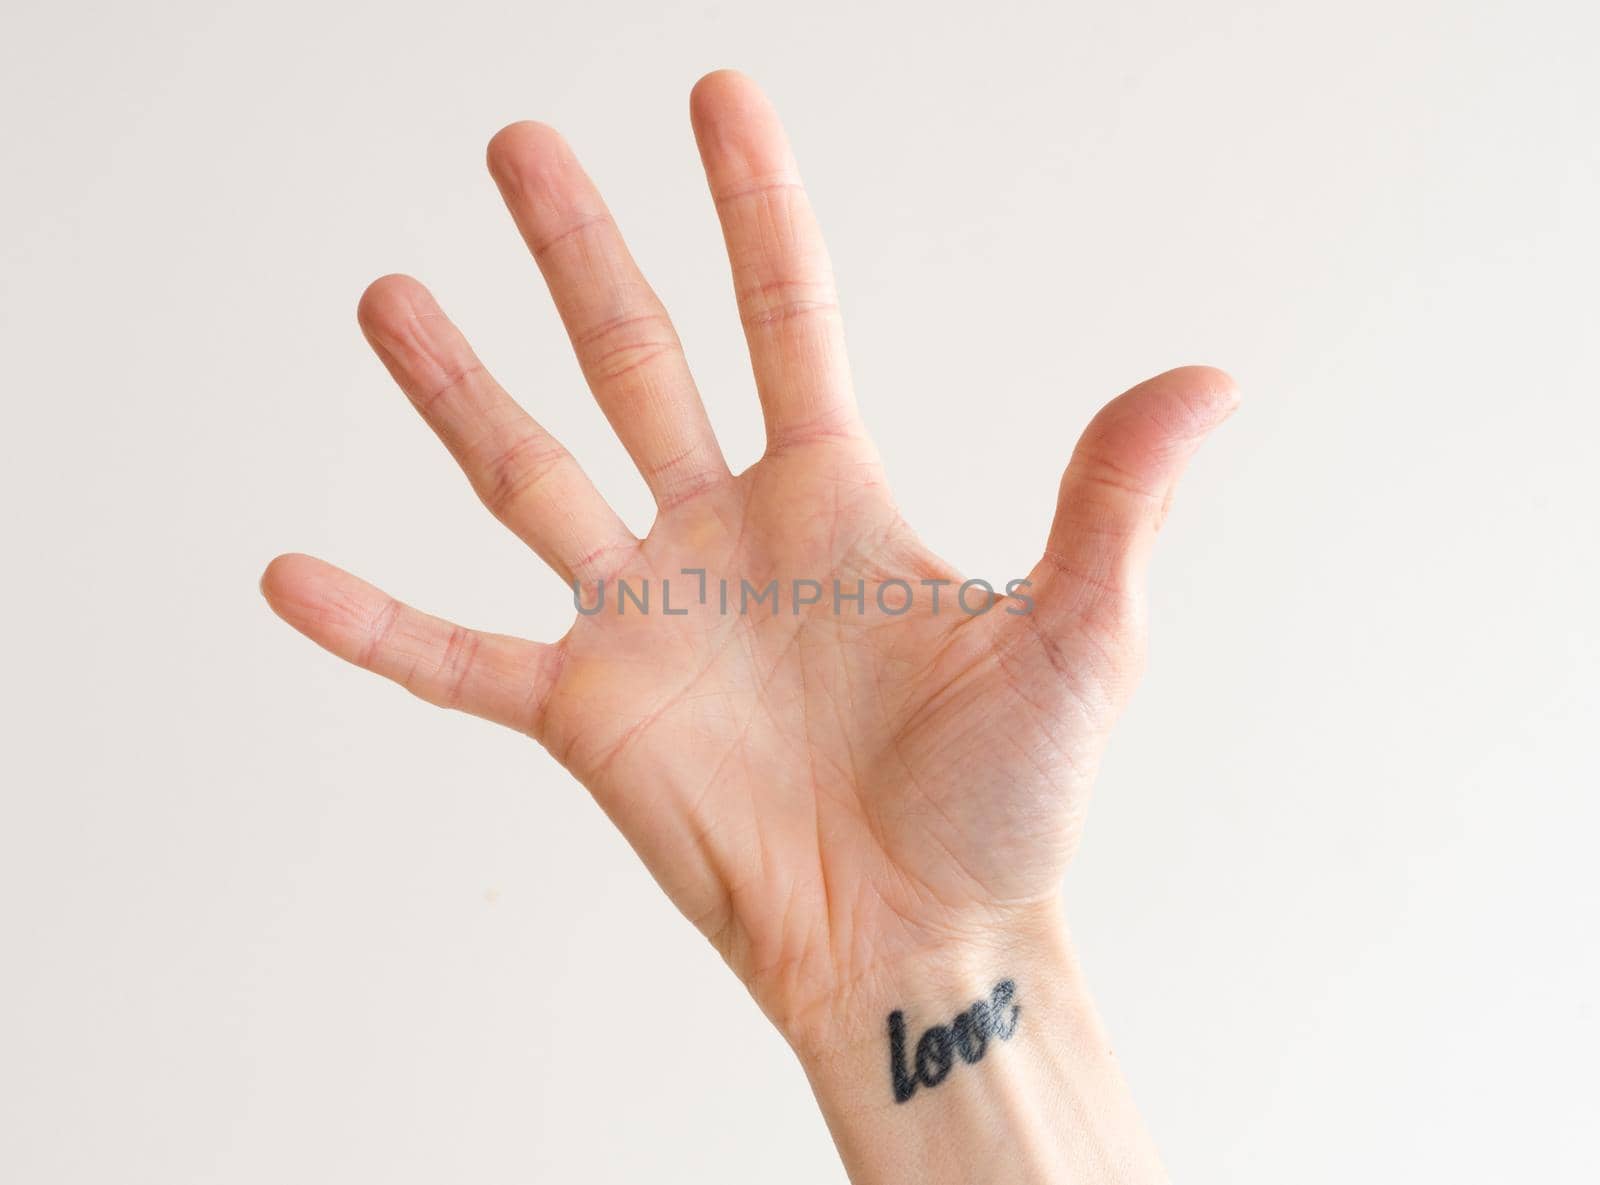 Women's open hand with fingers outstretched and love tattoo on wrist